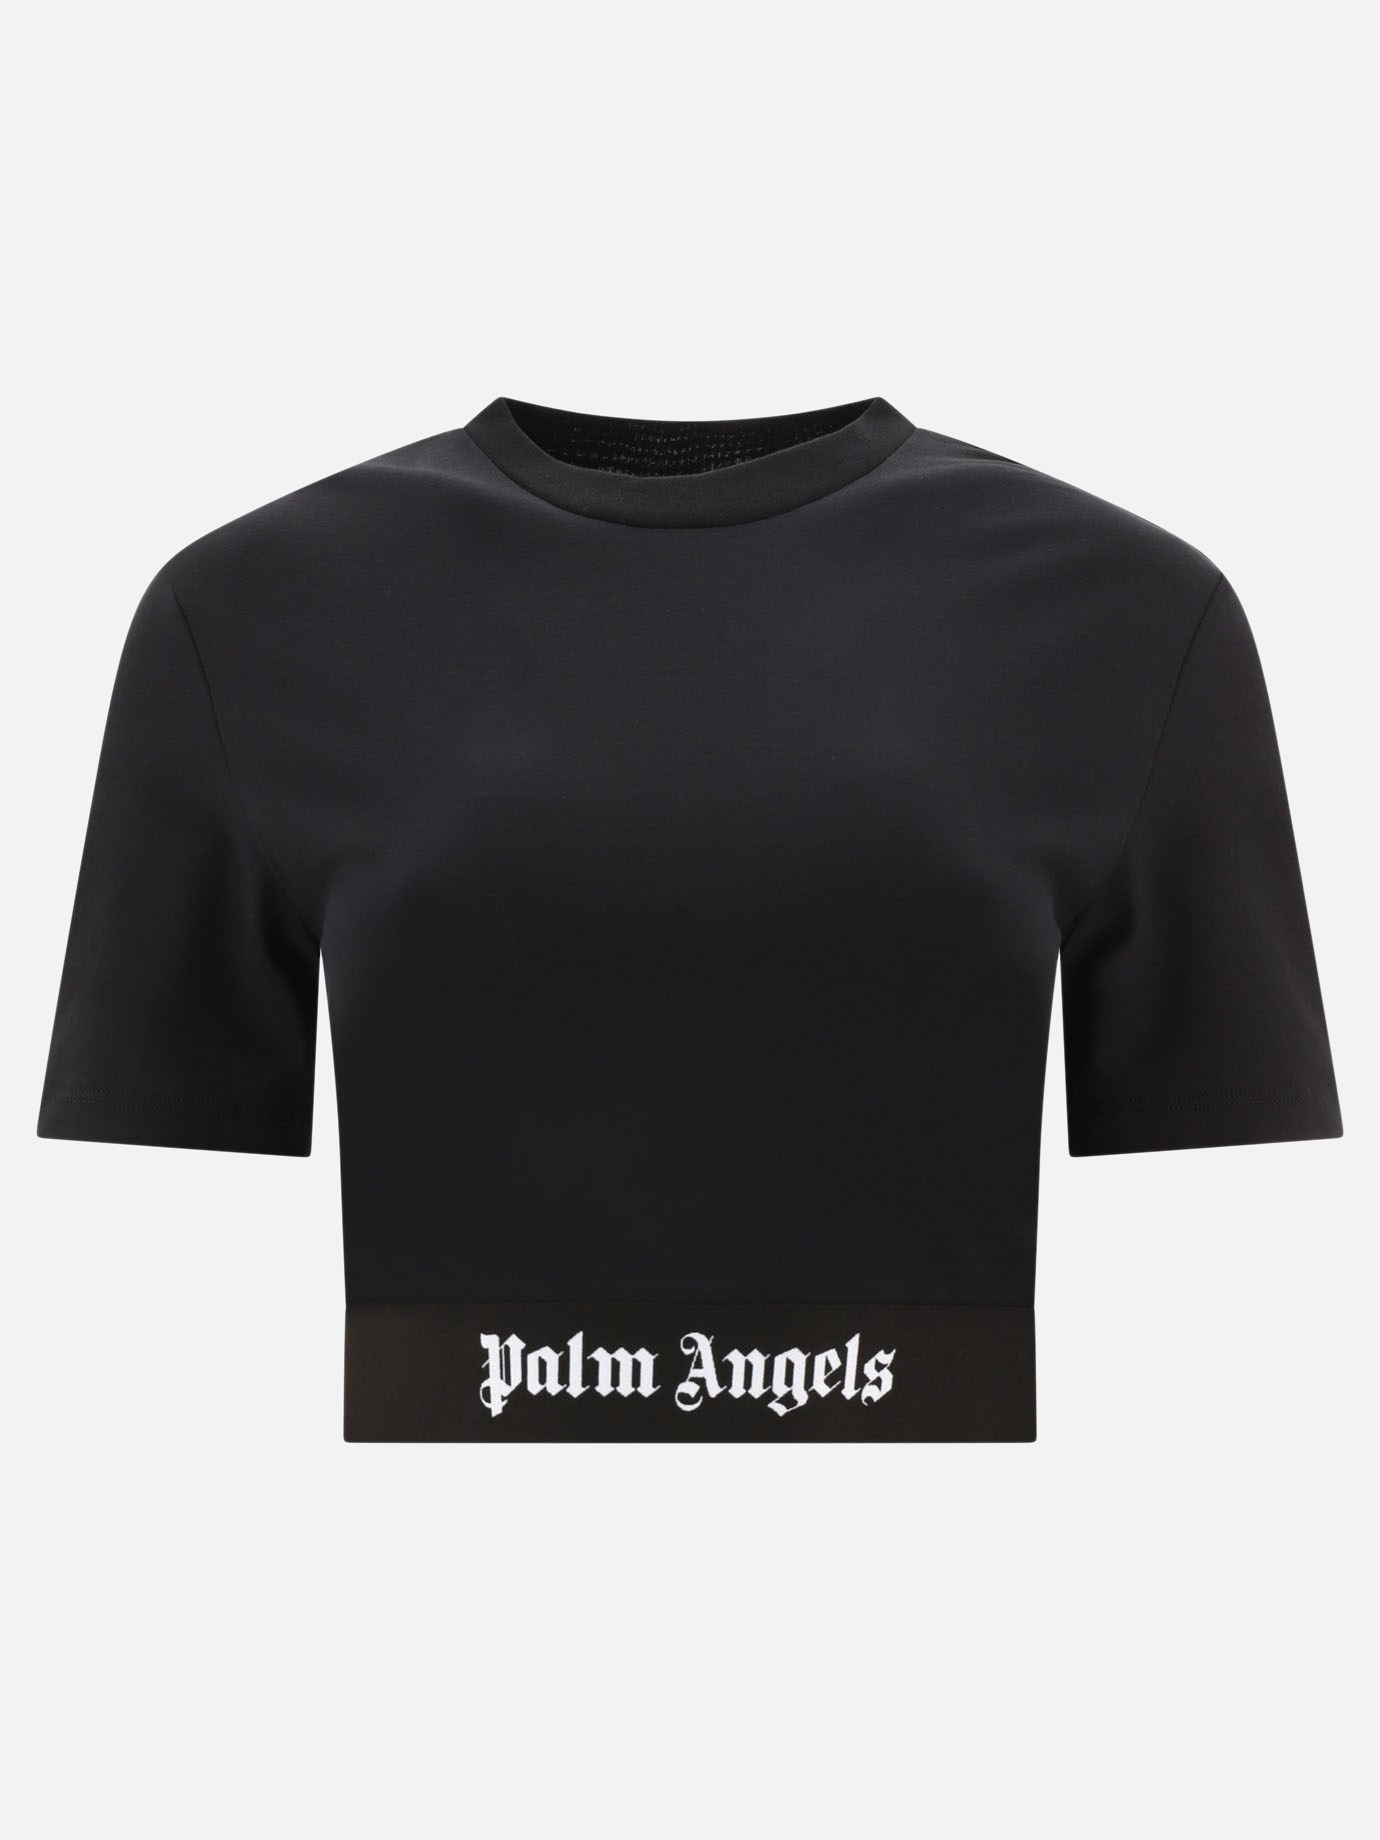  Logo Tape  cropped t-shirtby Palm Angels - 5